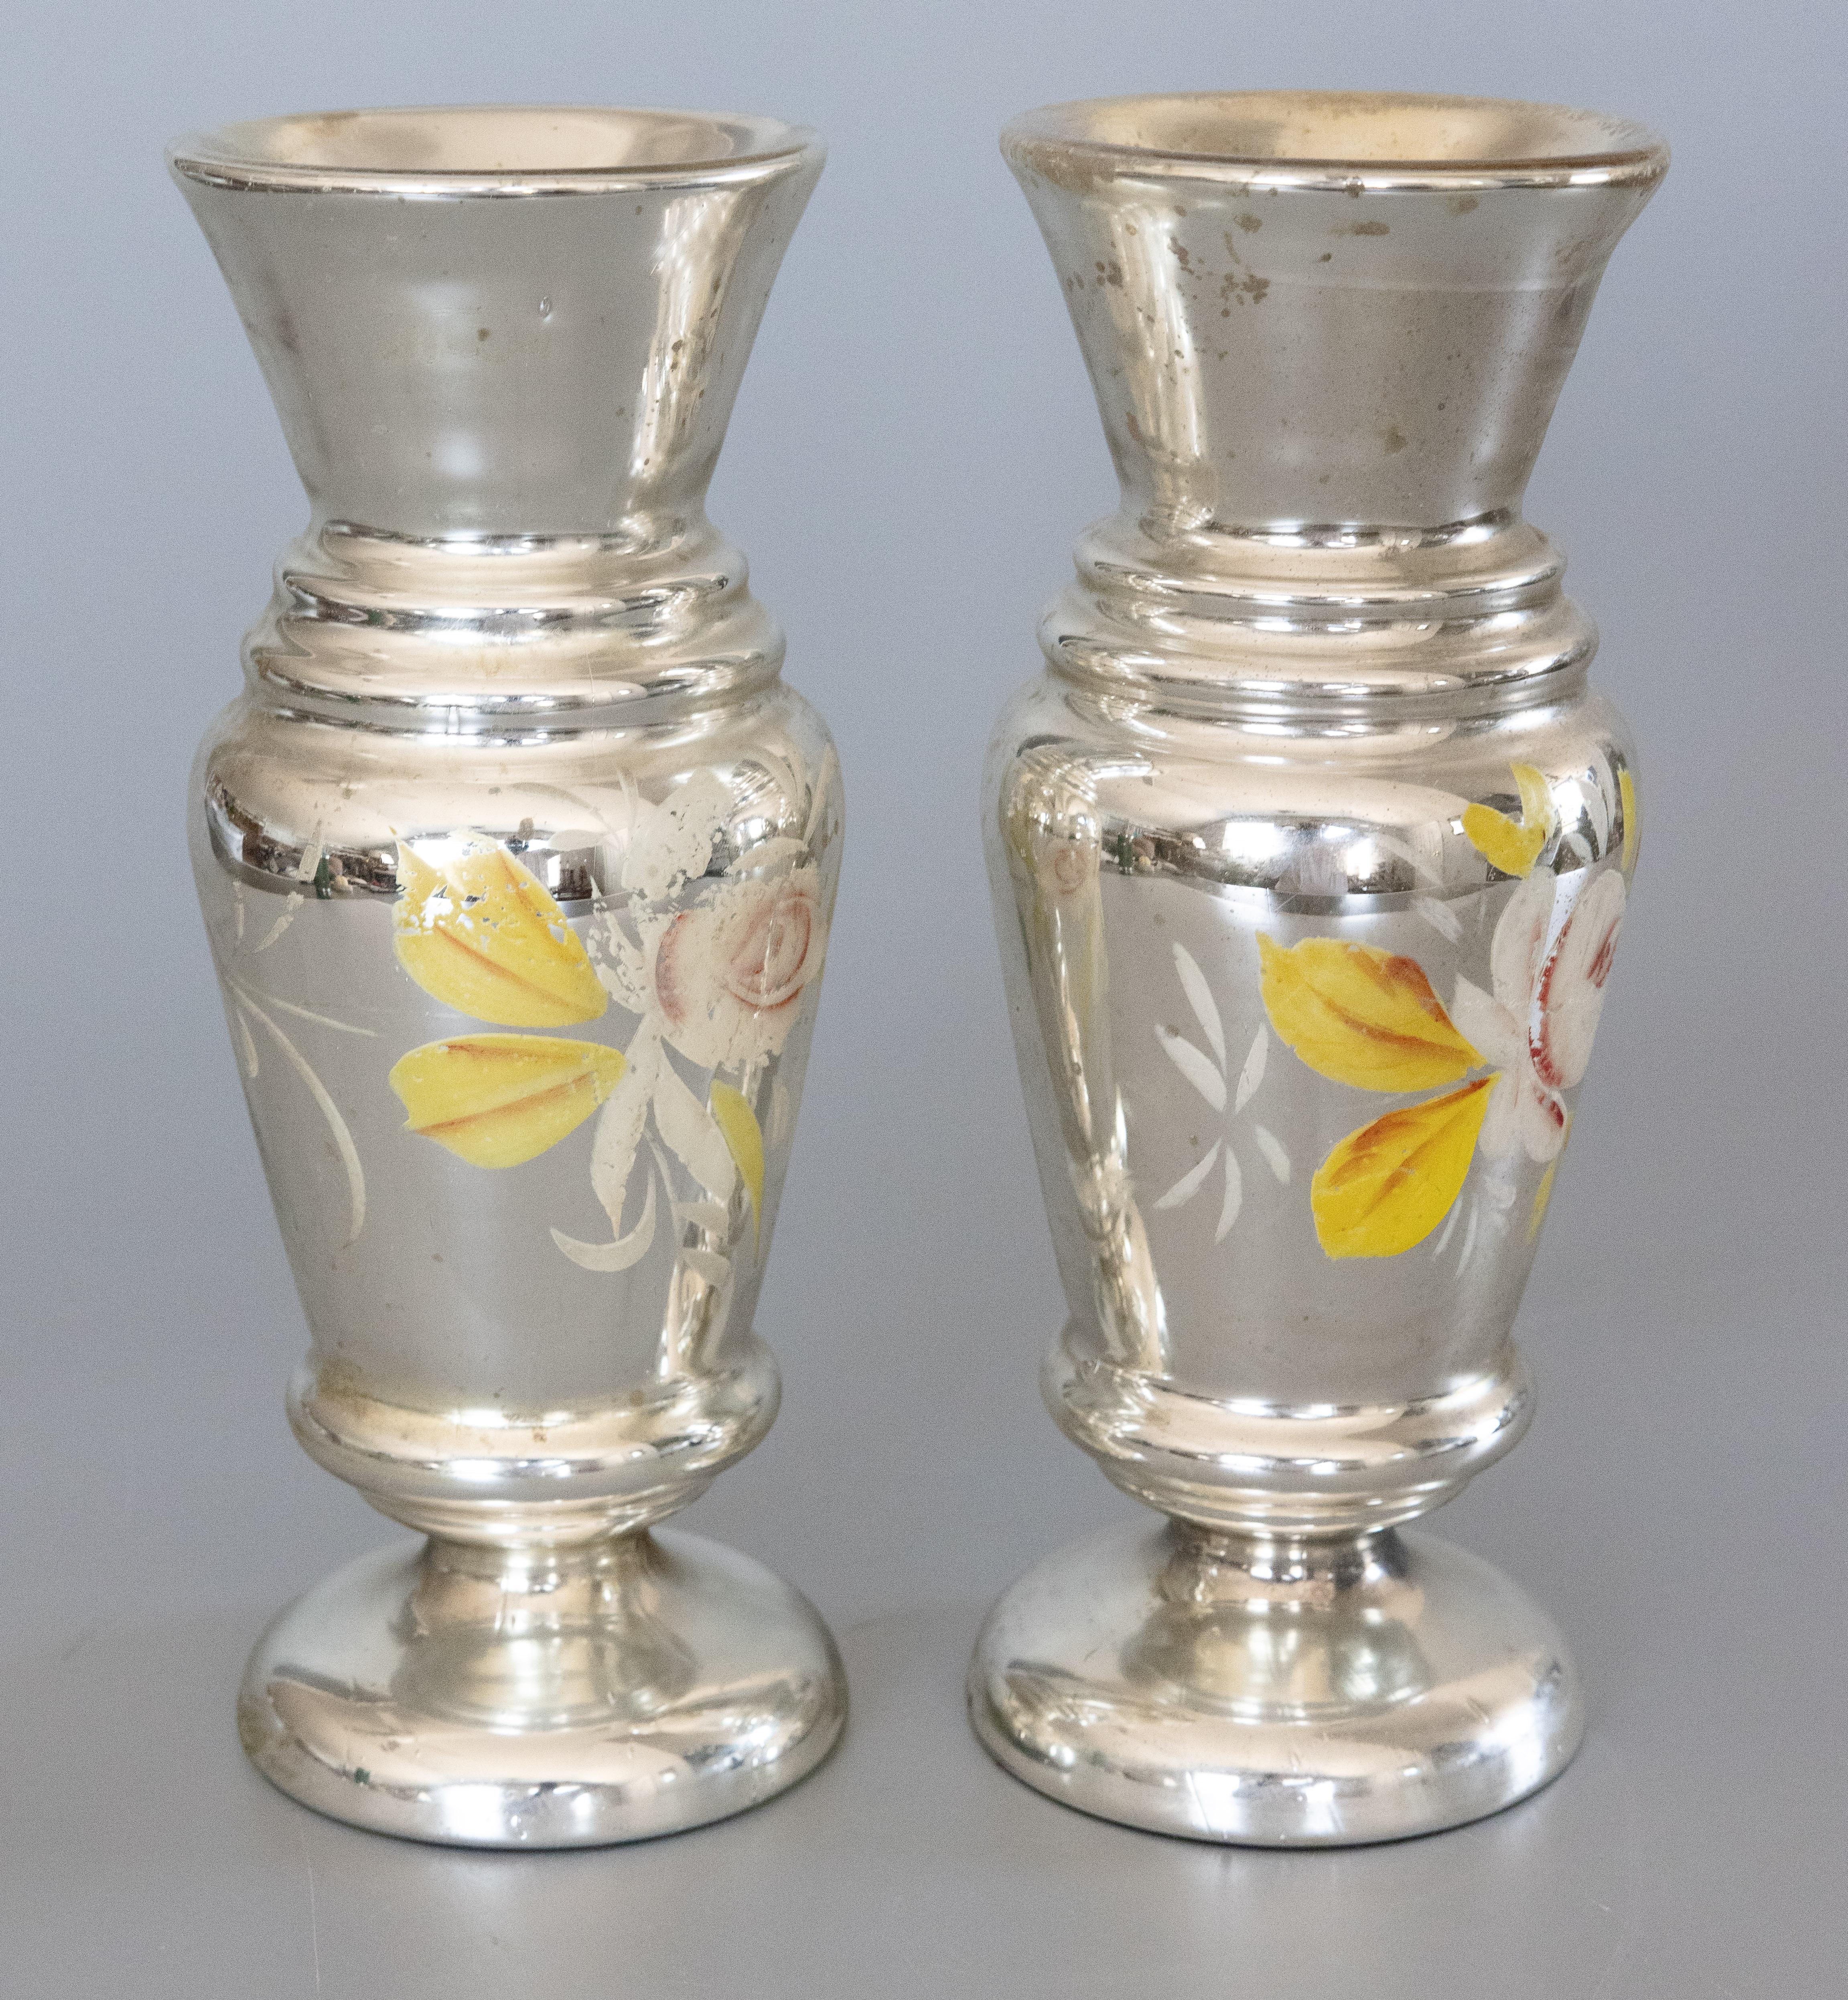 Pair of Large 19th Century English Silvered Mercury Glass Vases In Good Condition For Sale In Pearland, TX